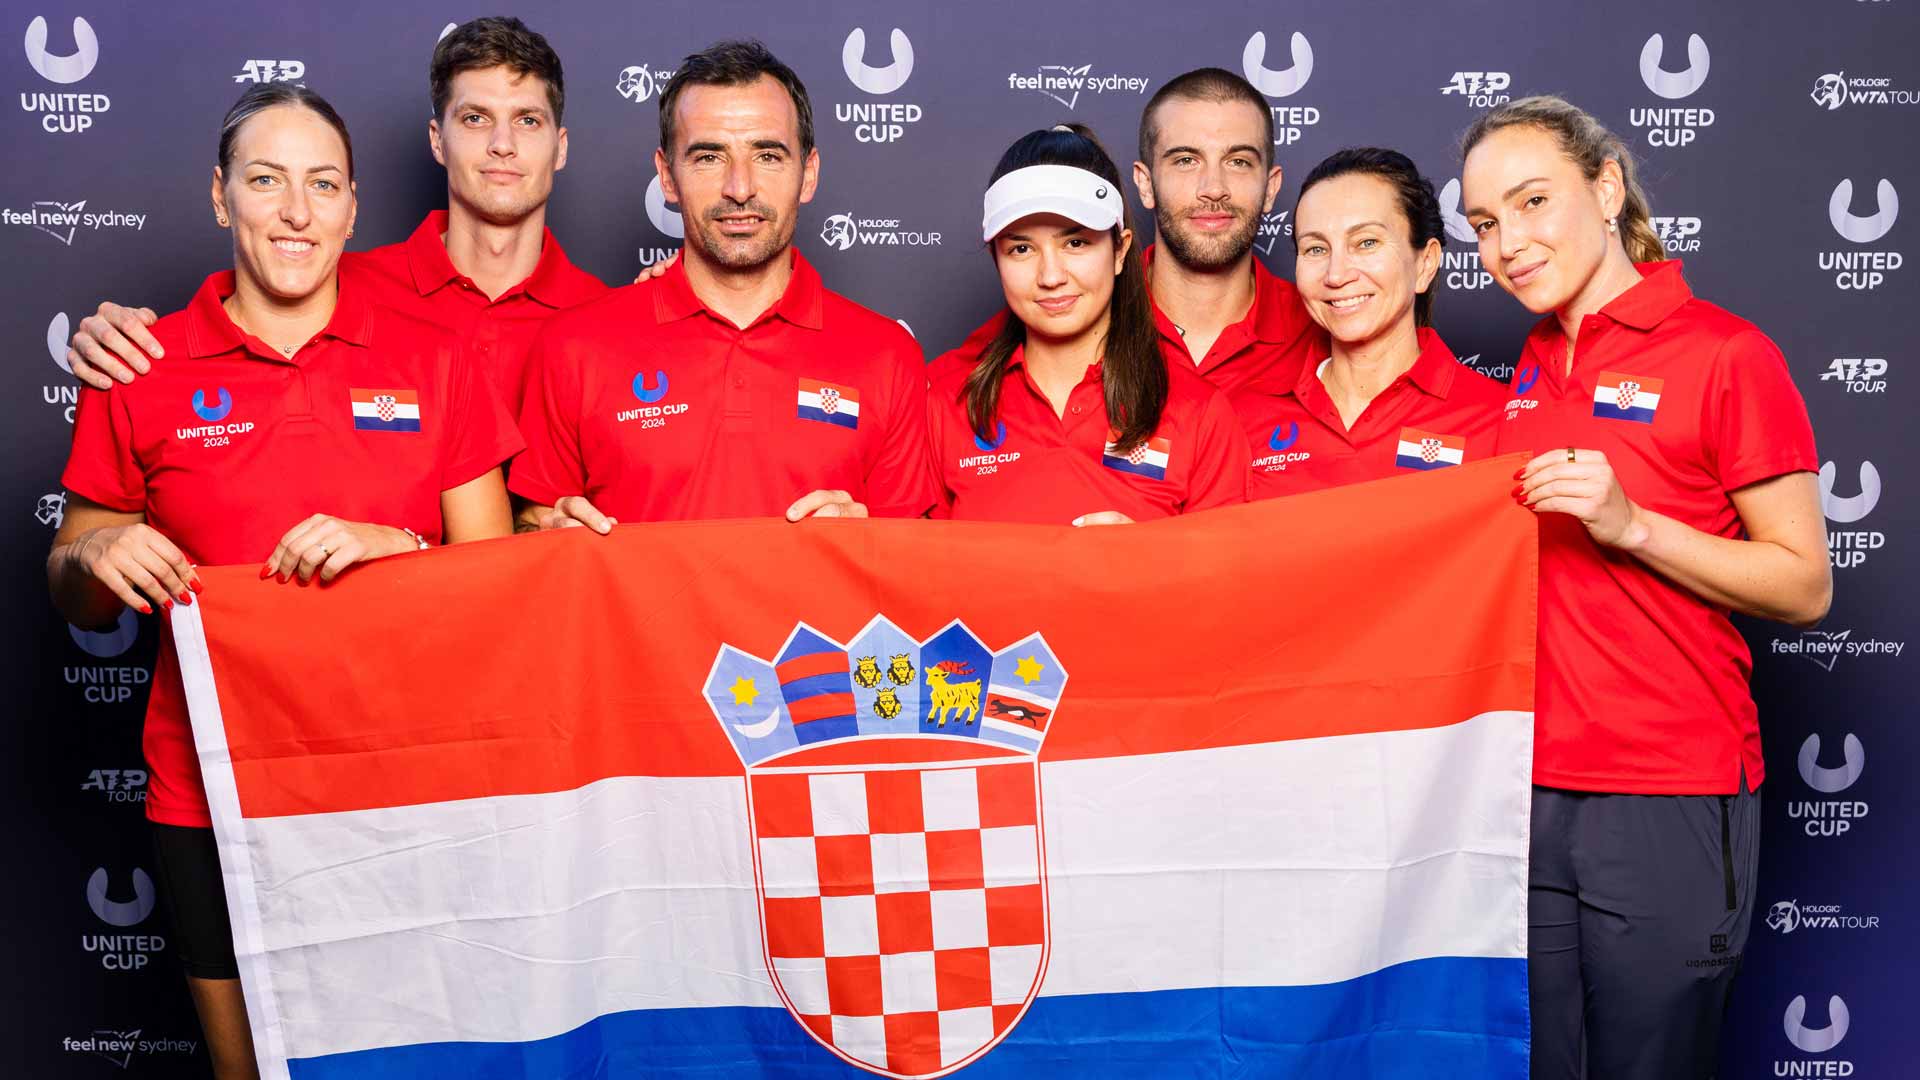 Borna Coric (third from right) and Donna Vekic (far right) hope to lead Croatia to glory in Sydney.